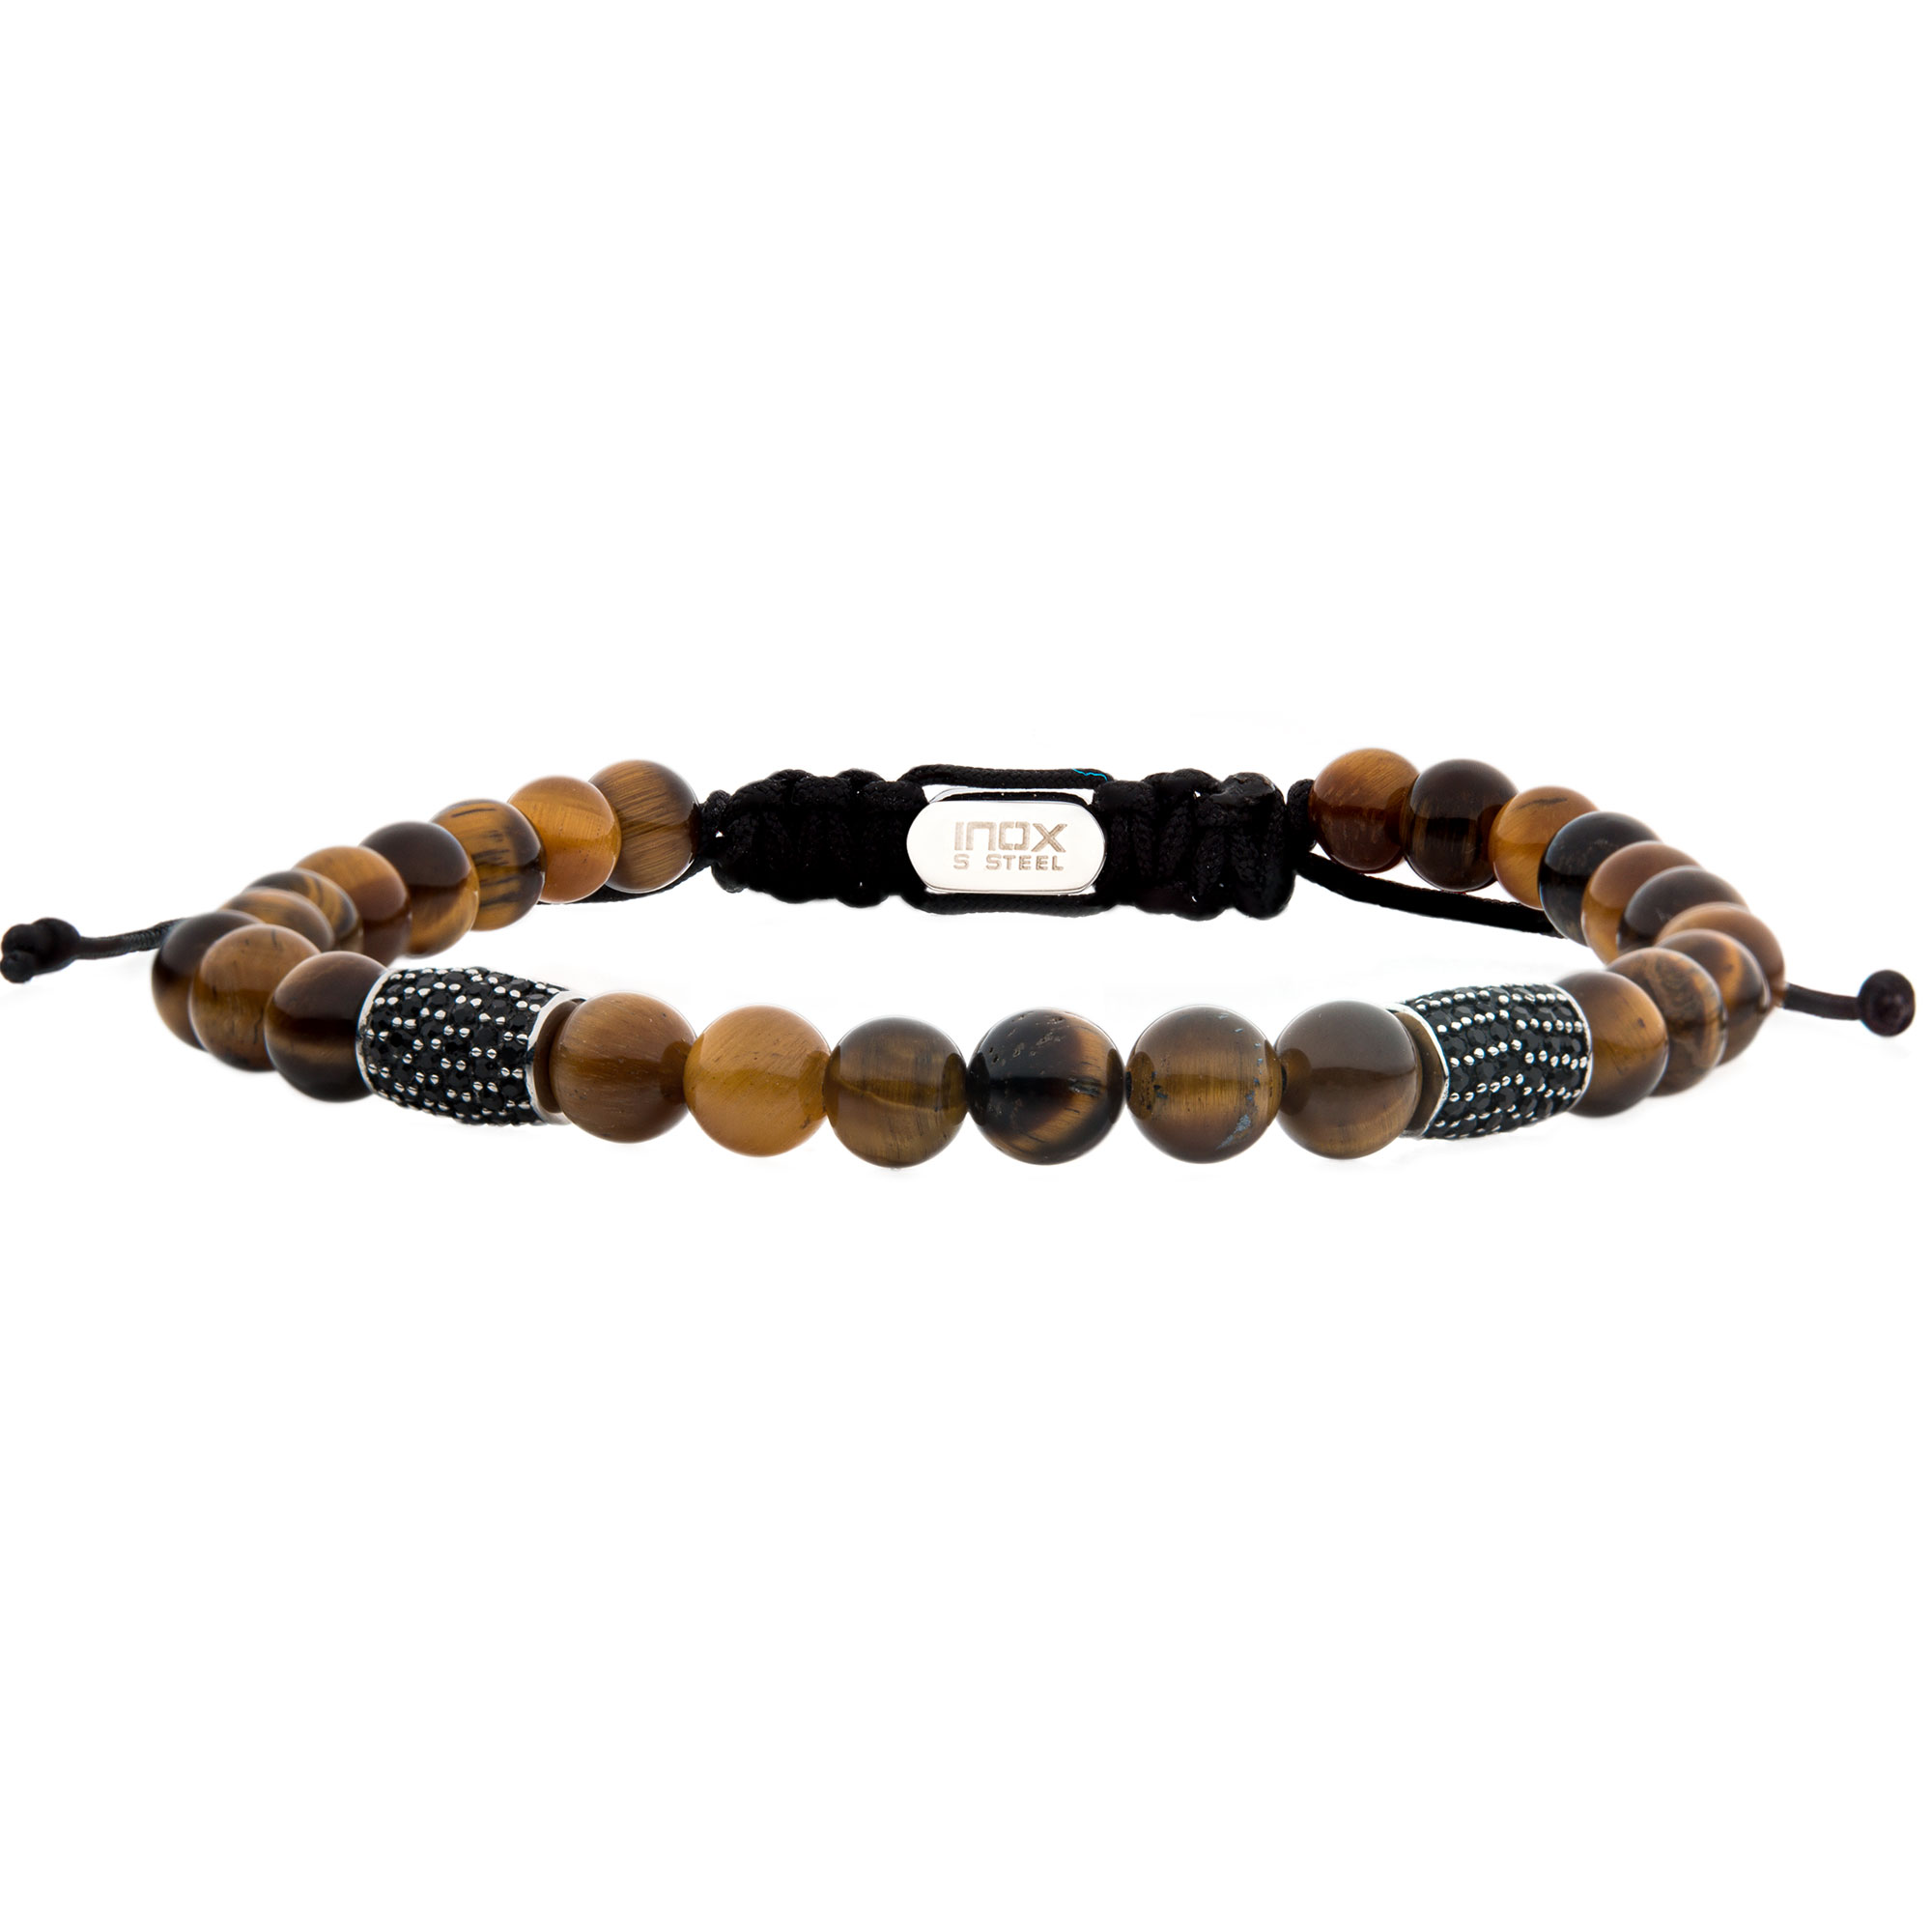 Stainless Steel Beads with Black CZ & Tiger Eye Stone Bead Adjustable Non-Braided Bracelet Lewis Jewelers, Inc. Ansonia, CT